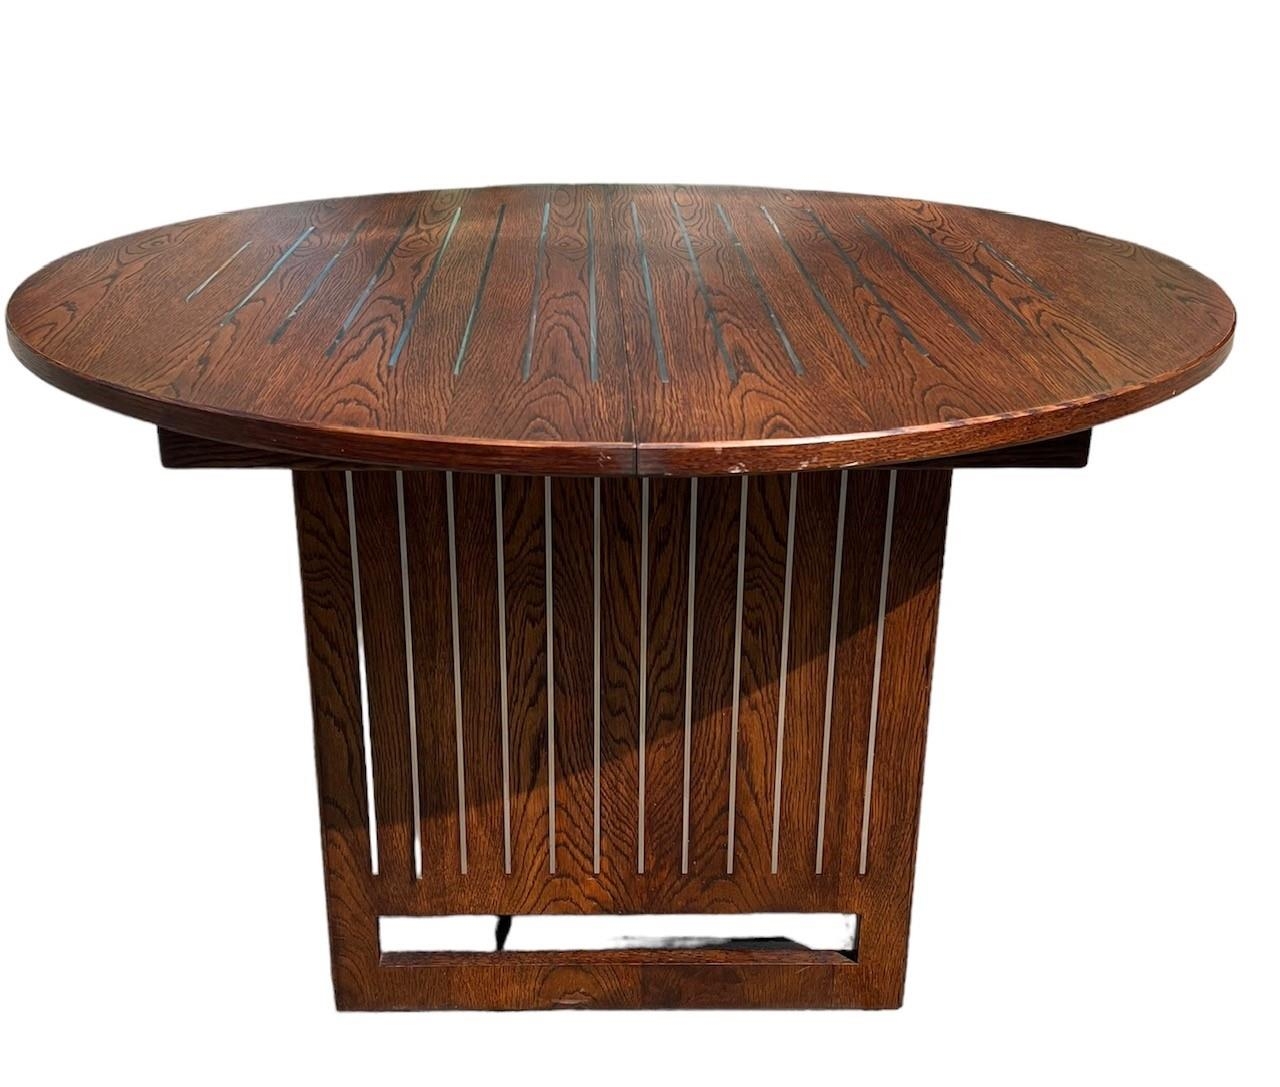 A CONTEMPORARY OAK AND STEEL INLAY DRAW LEAF DINING TABLE With single leaf, together with a matching